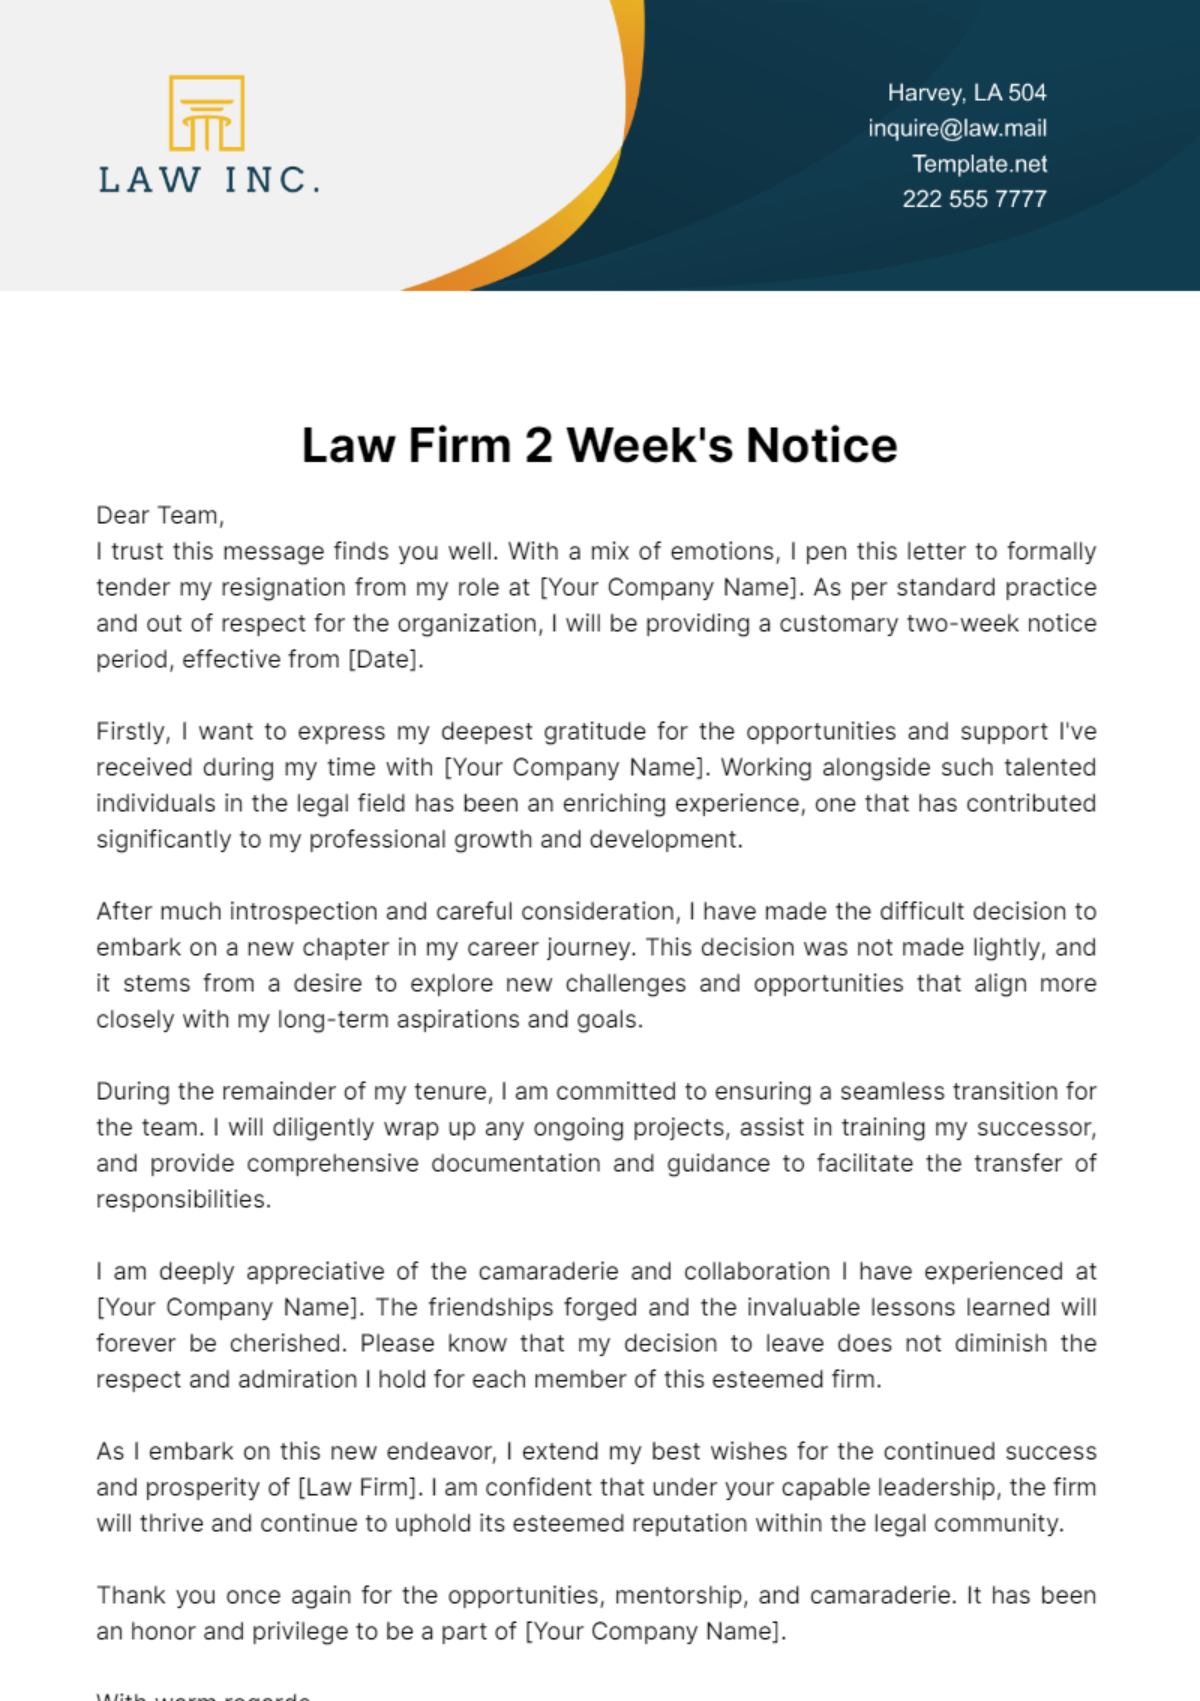 Law Firm 2 Week's Notice Template